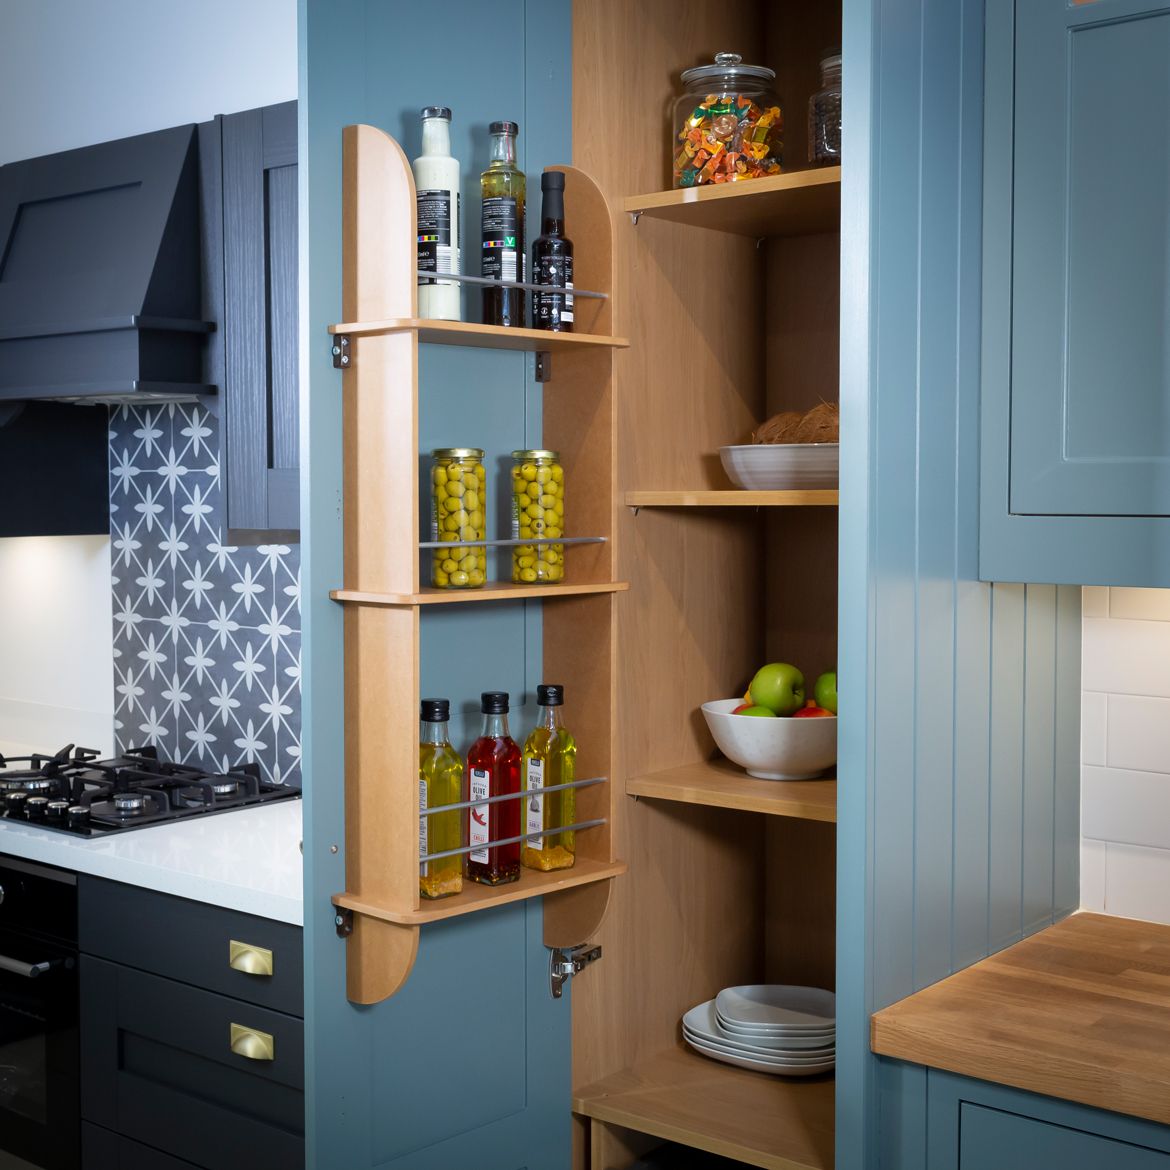 How to solve your kitchen storage dilemmas - from cluttered worktops to packed presses